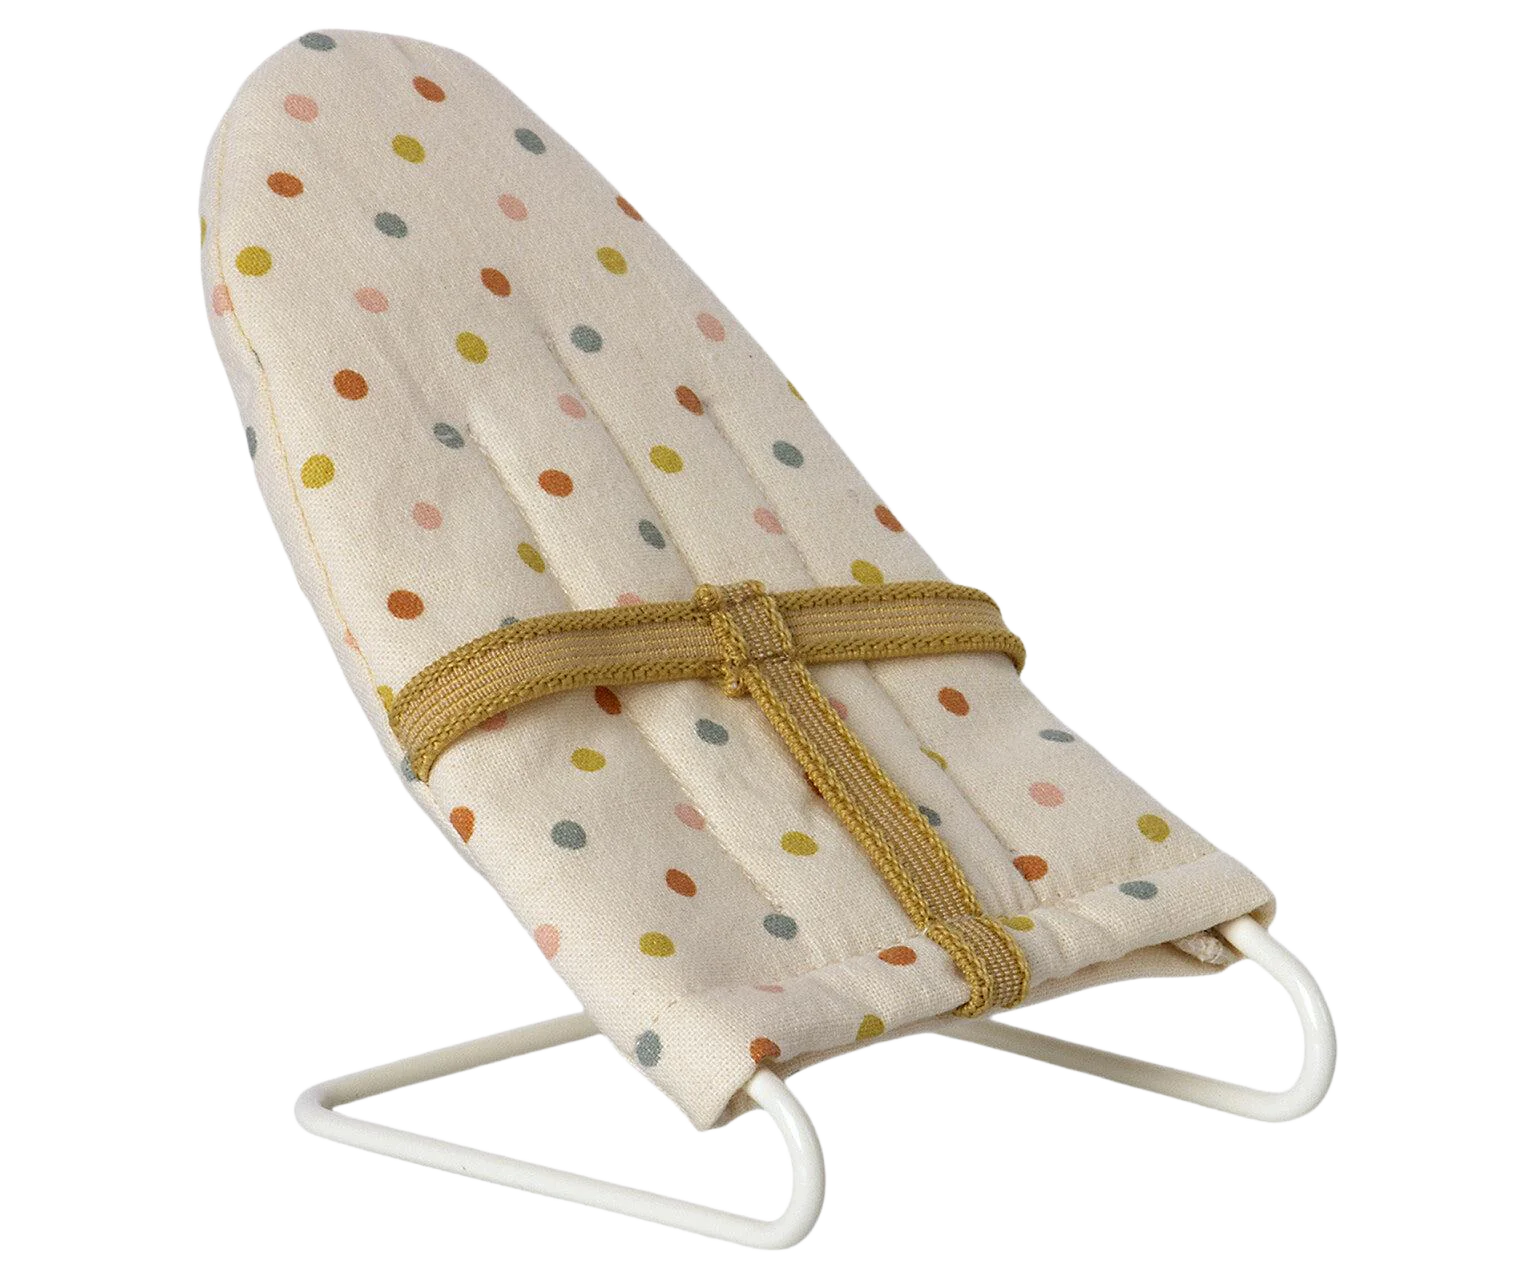 Babysitter  / Bouncy Chair - Micro sized